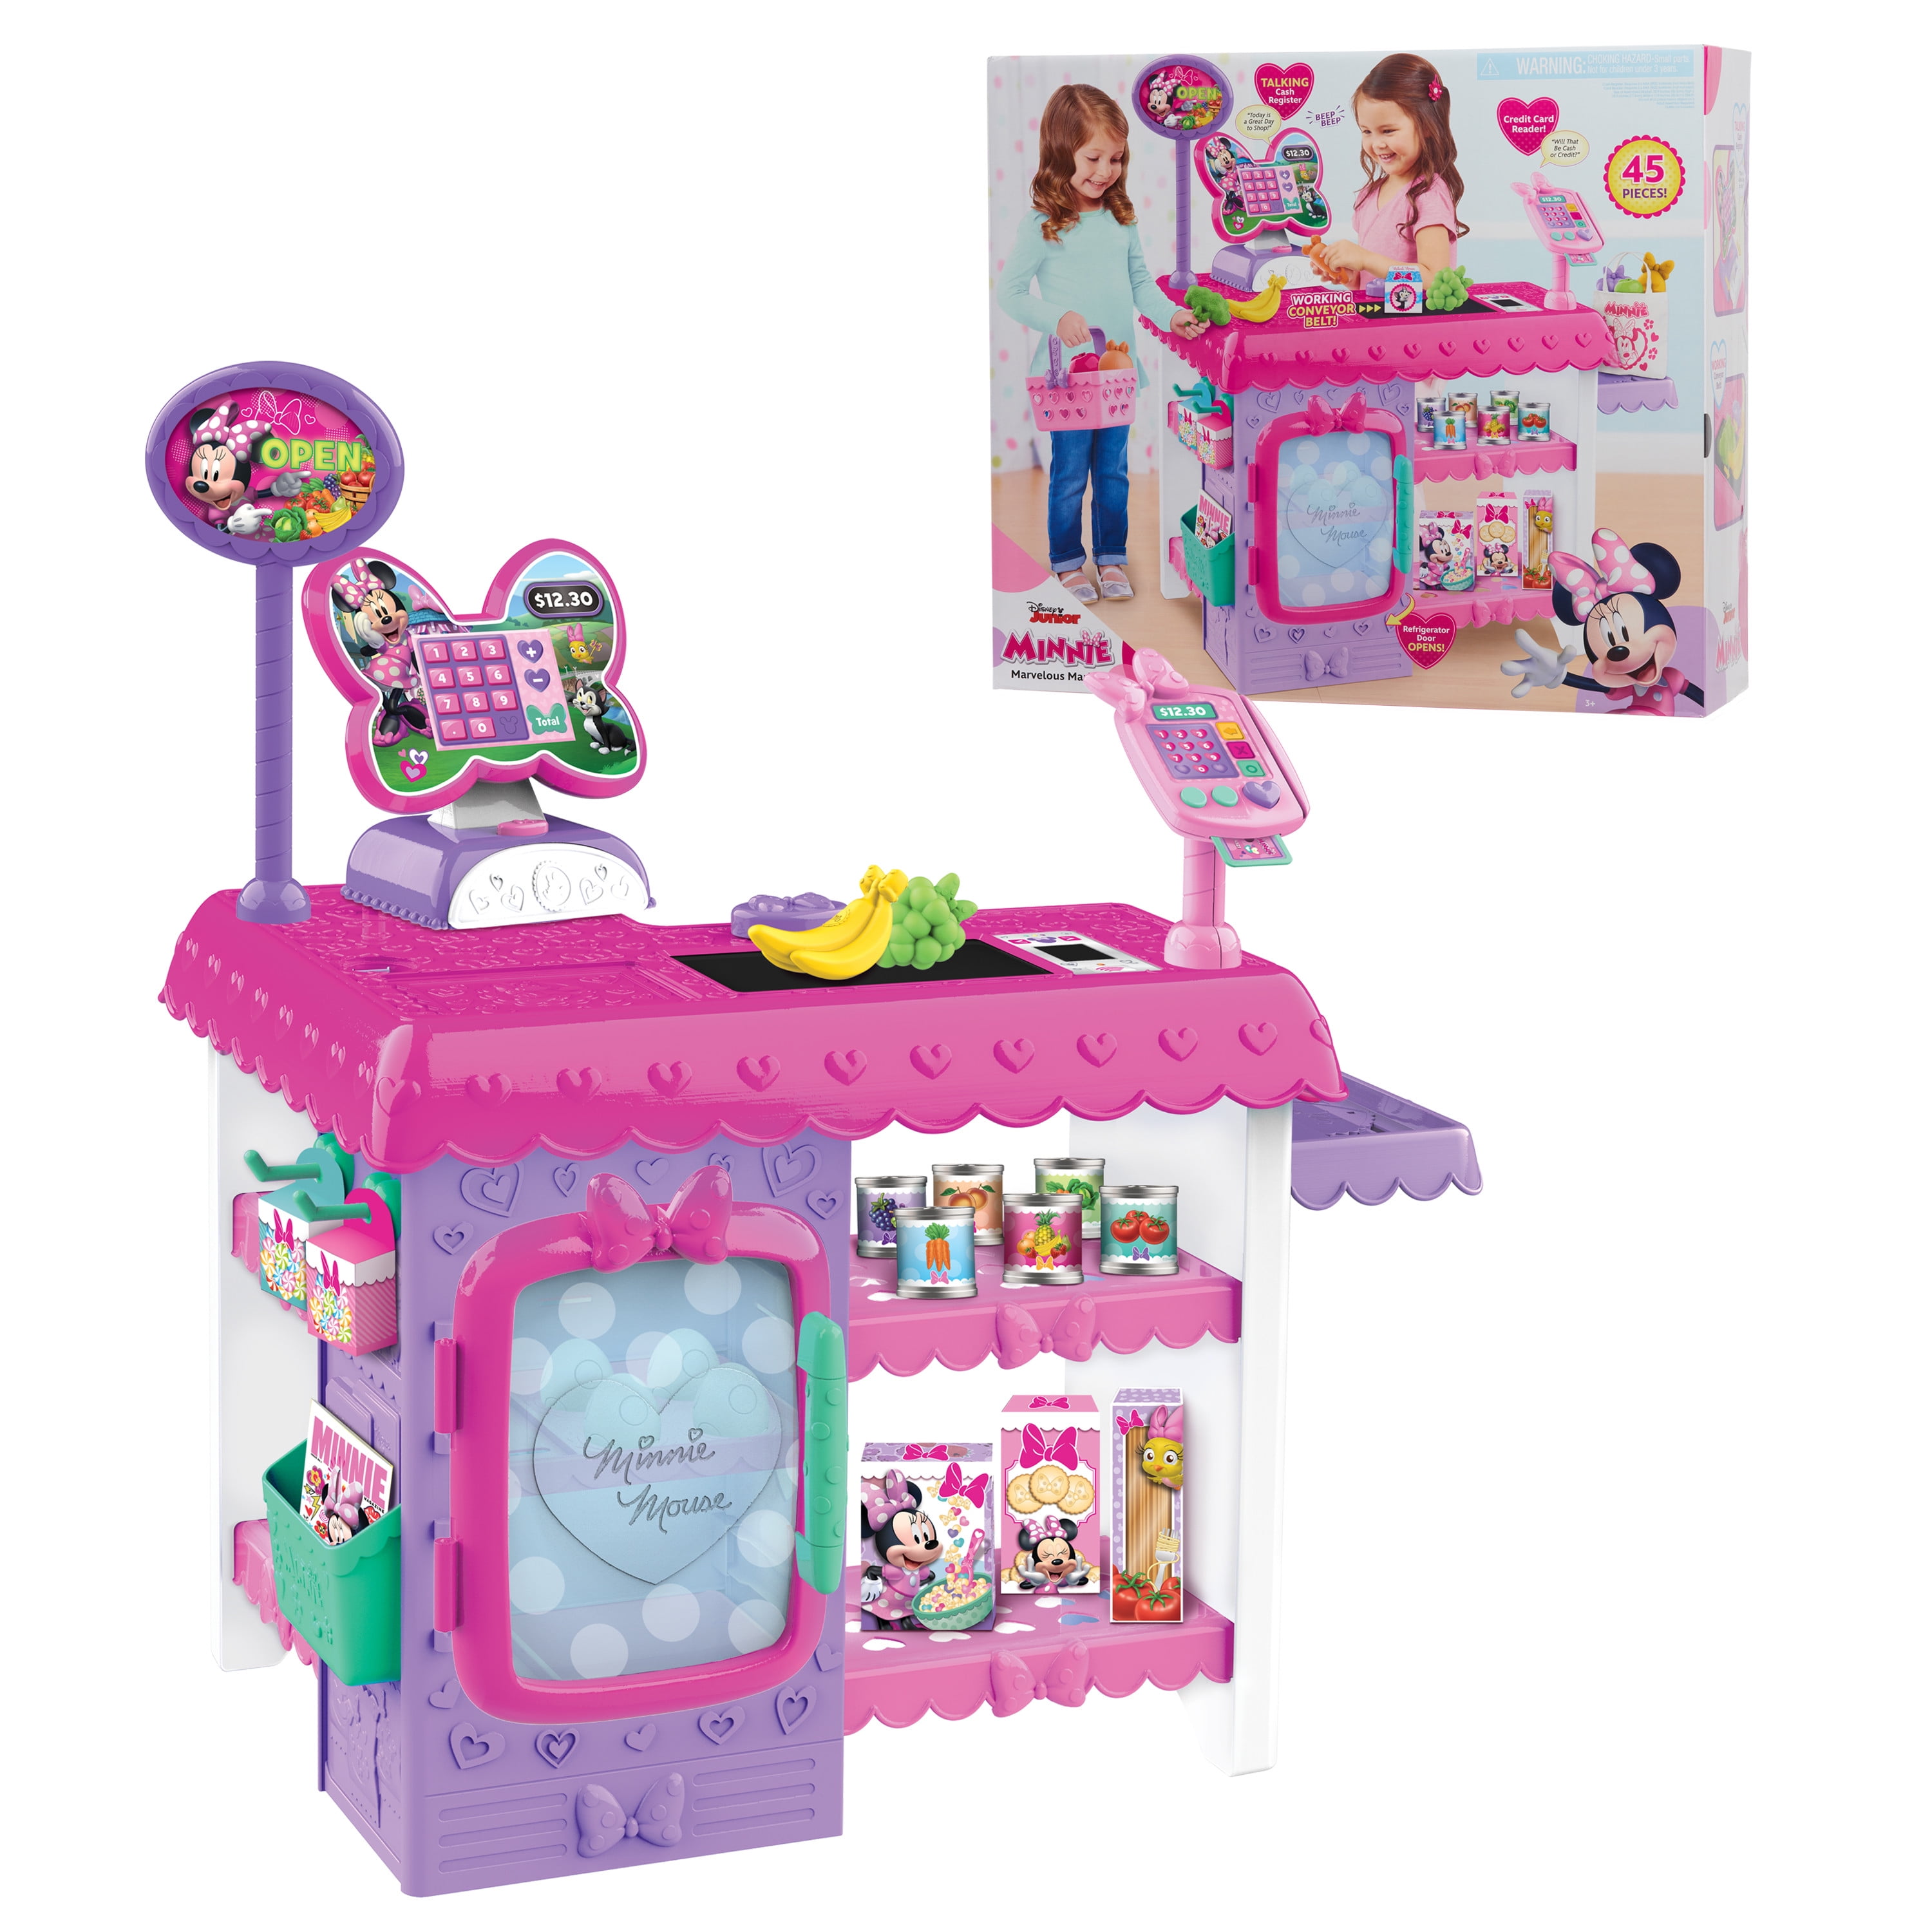 Disney Minnie Mouse Kitchen Play Set for Kids Pink for sale online 